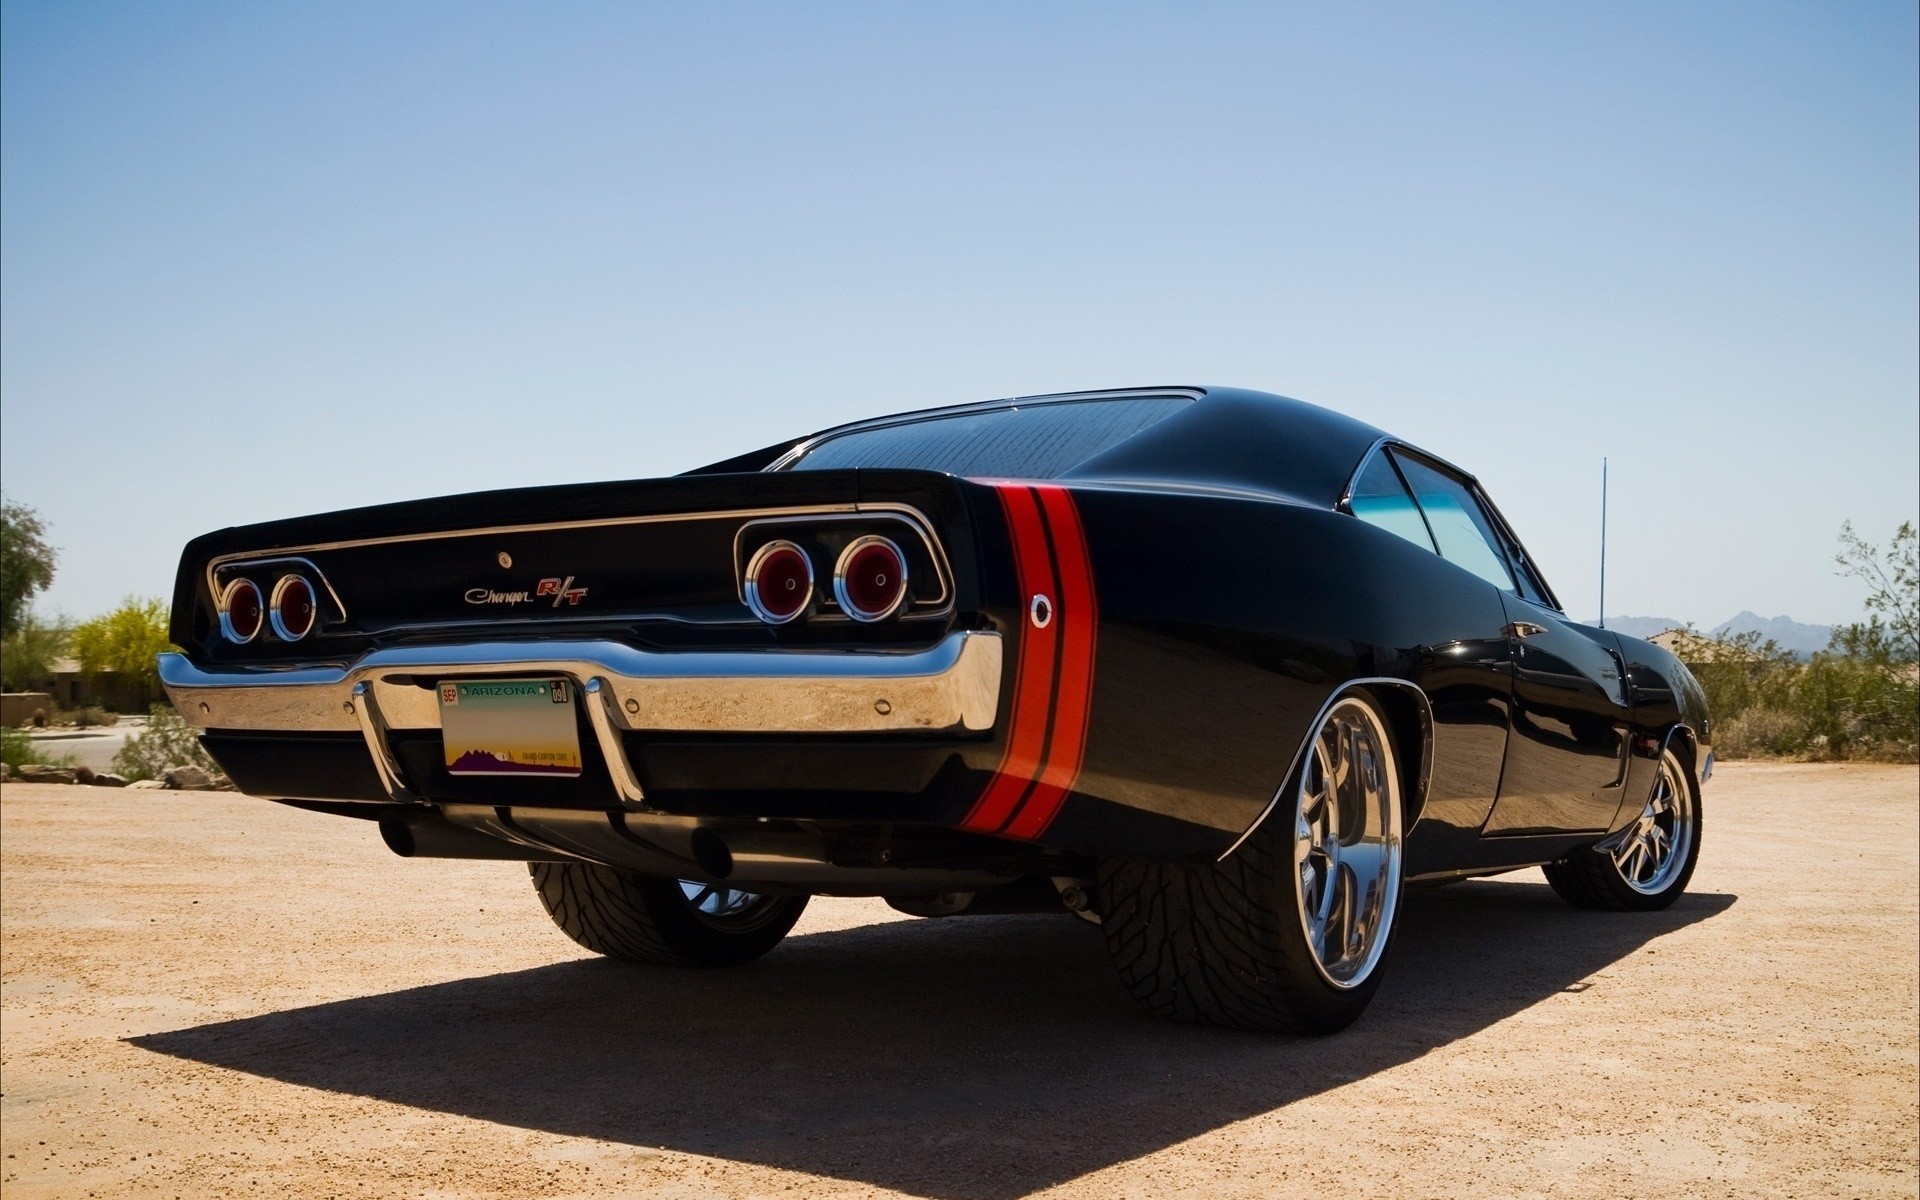 dodge, Charger, Rt, Muscle, Cars, Hot, Rods, Tuning, Roads Wallpaper